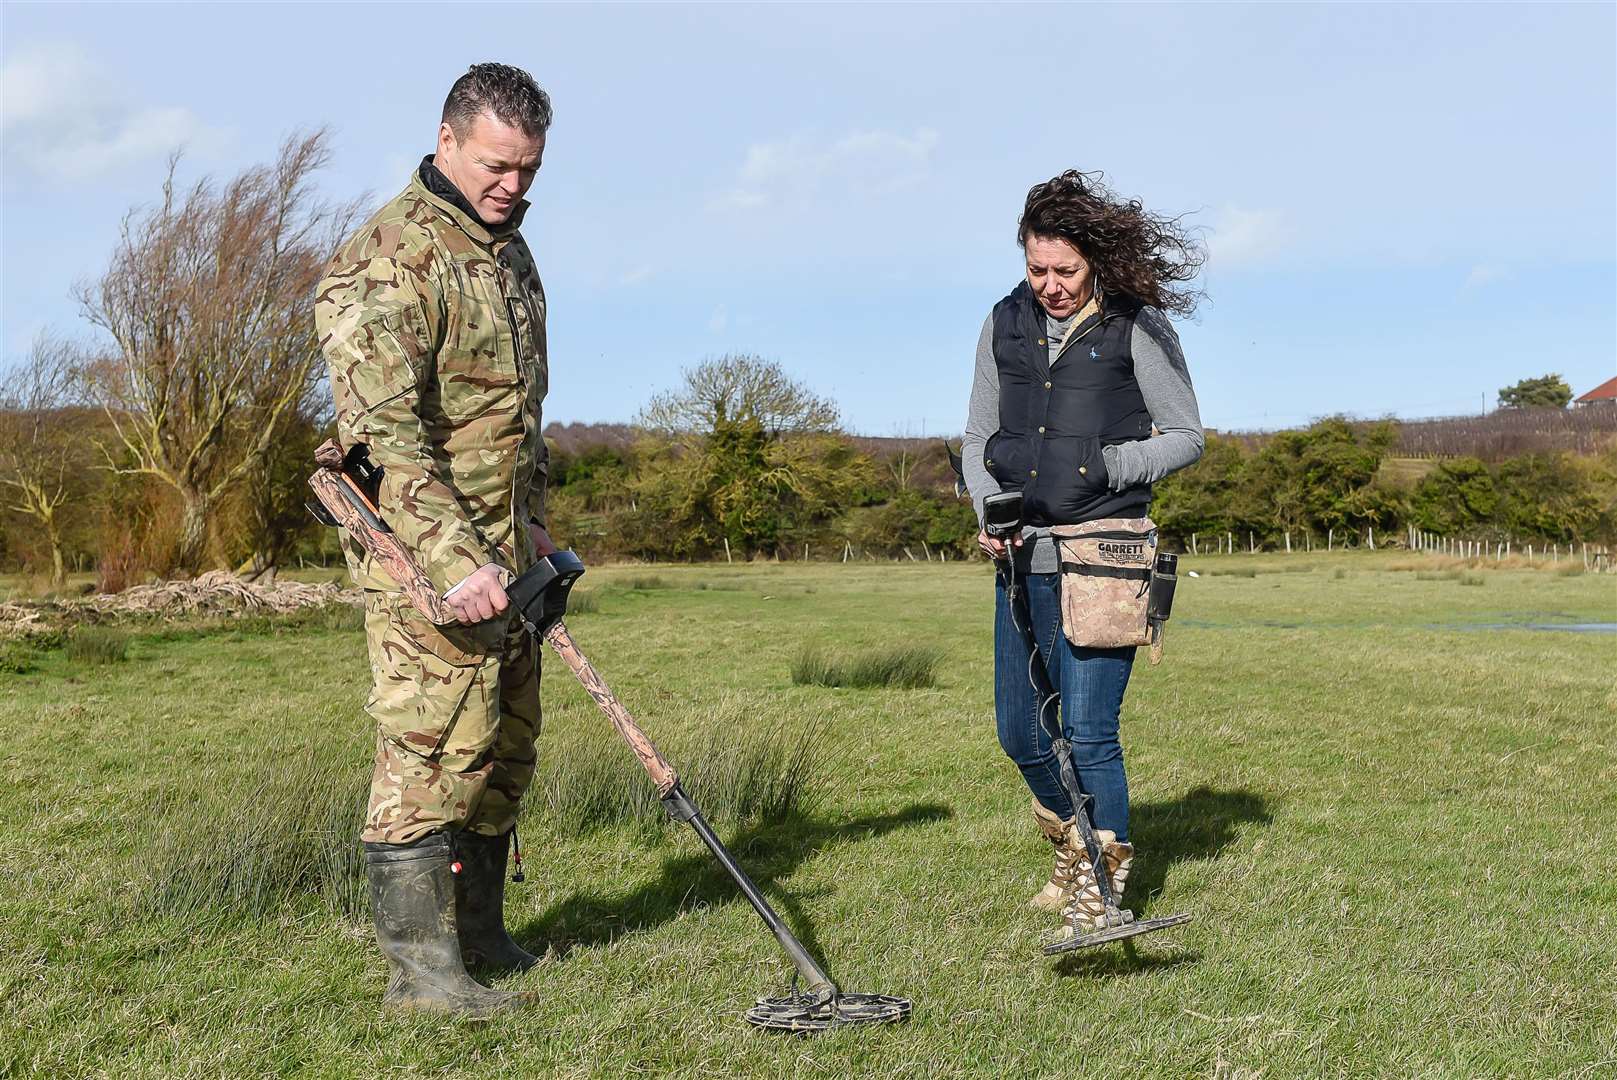 Ricky Shubert and Rachel Carter found a gold Saxon pendant while metal detecting. Picture: Alan Langley